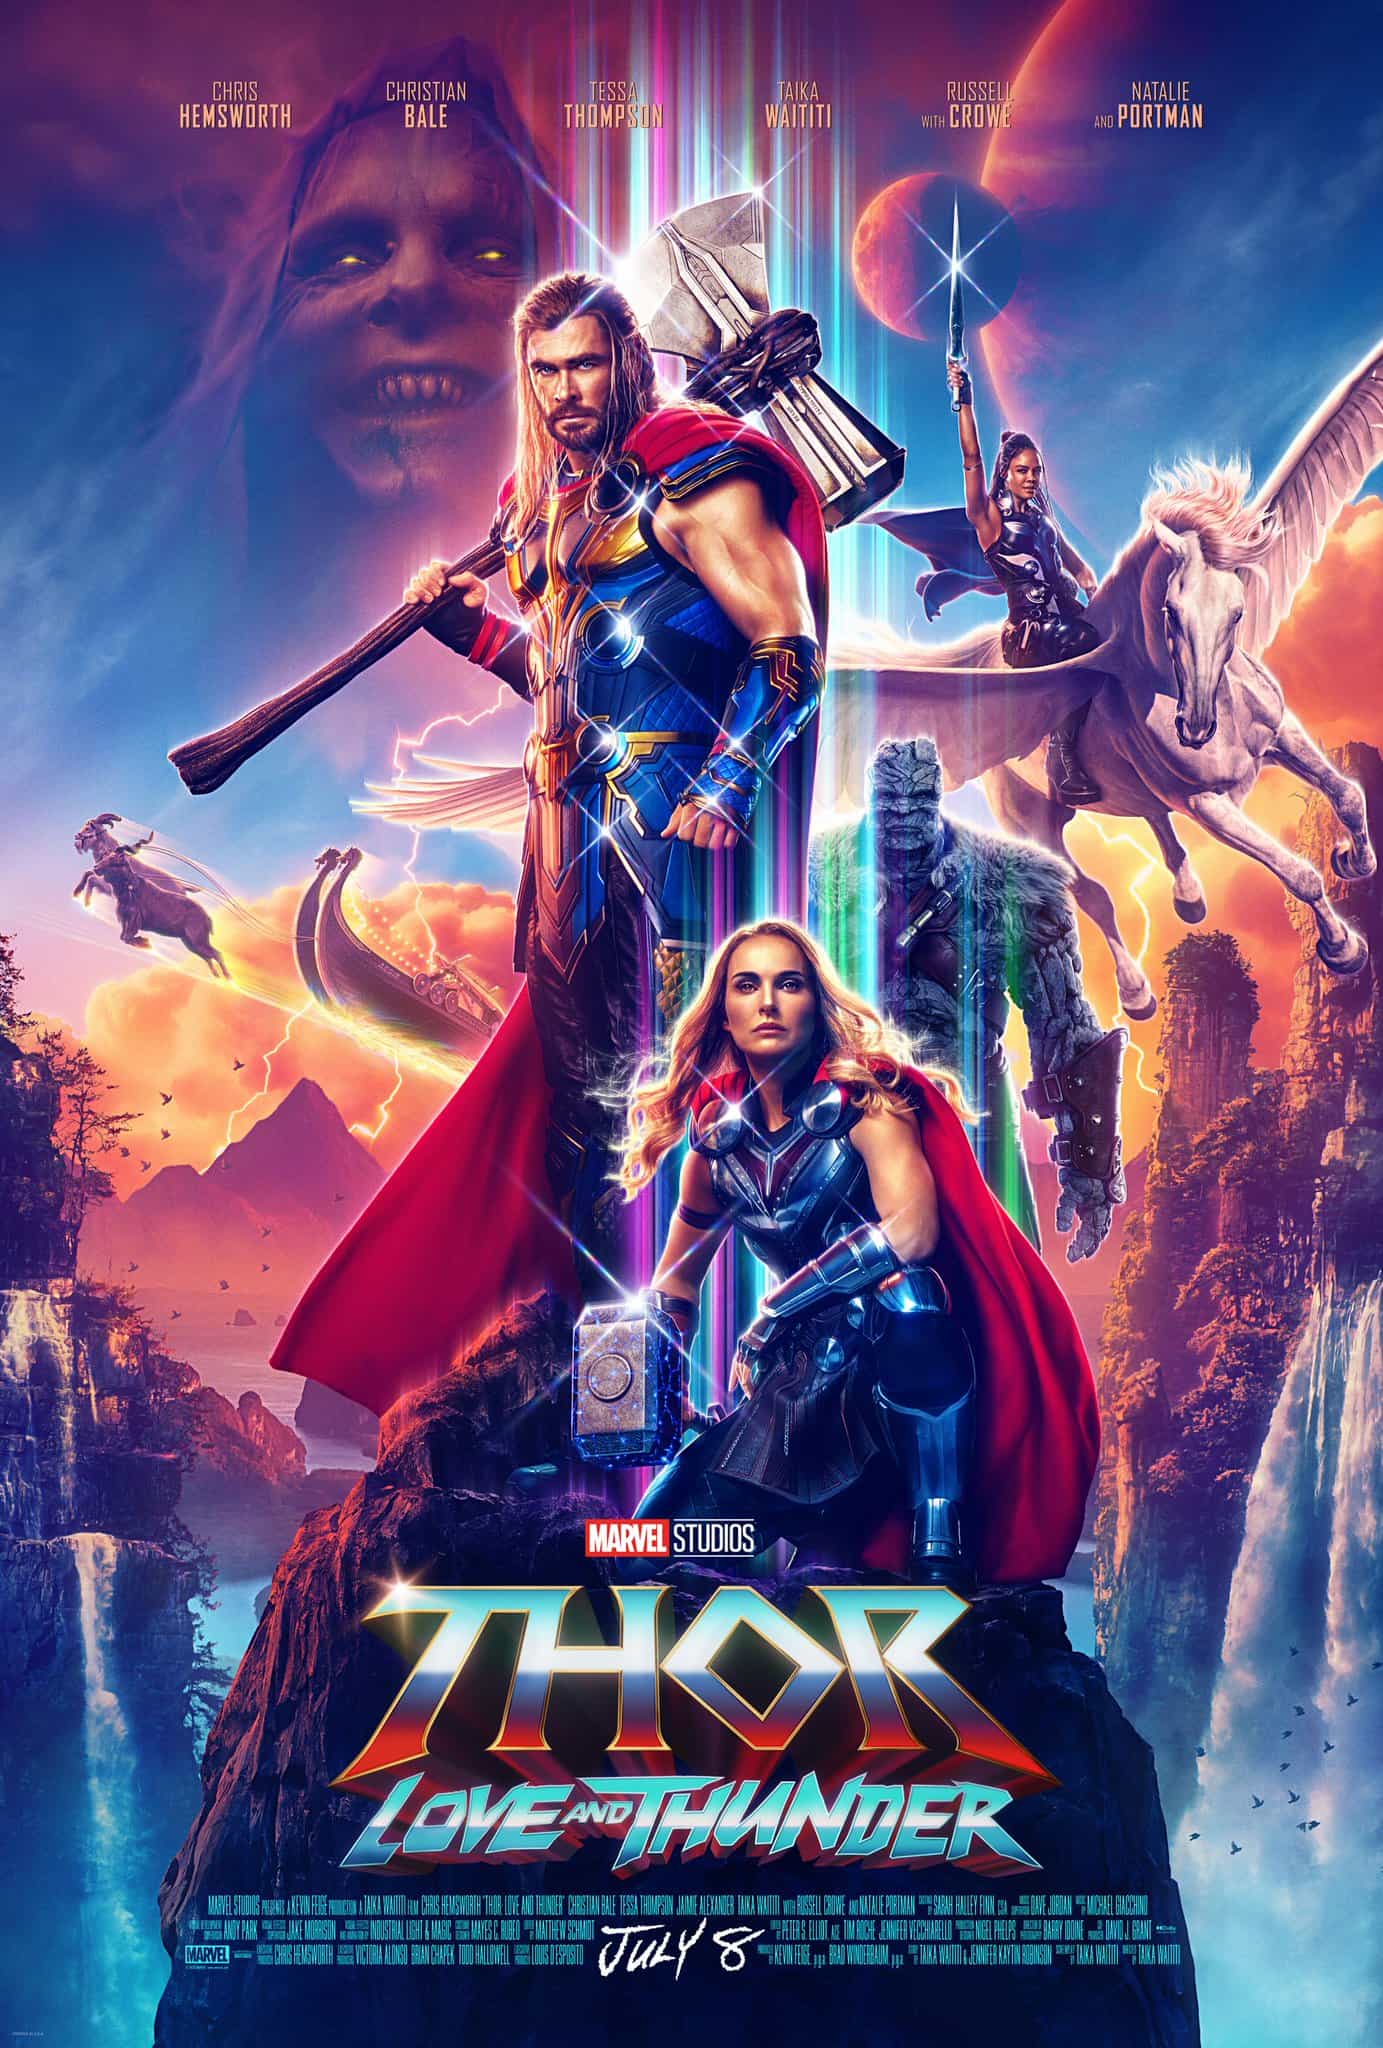 US Box Office Weekend Report 8th - 10th July 2022: Fourth Thor Movie hits the top on its debut with $144 Million as the US box office